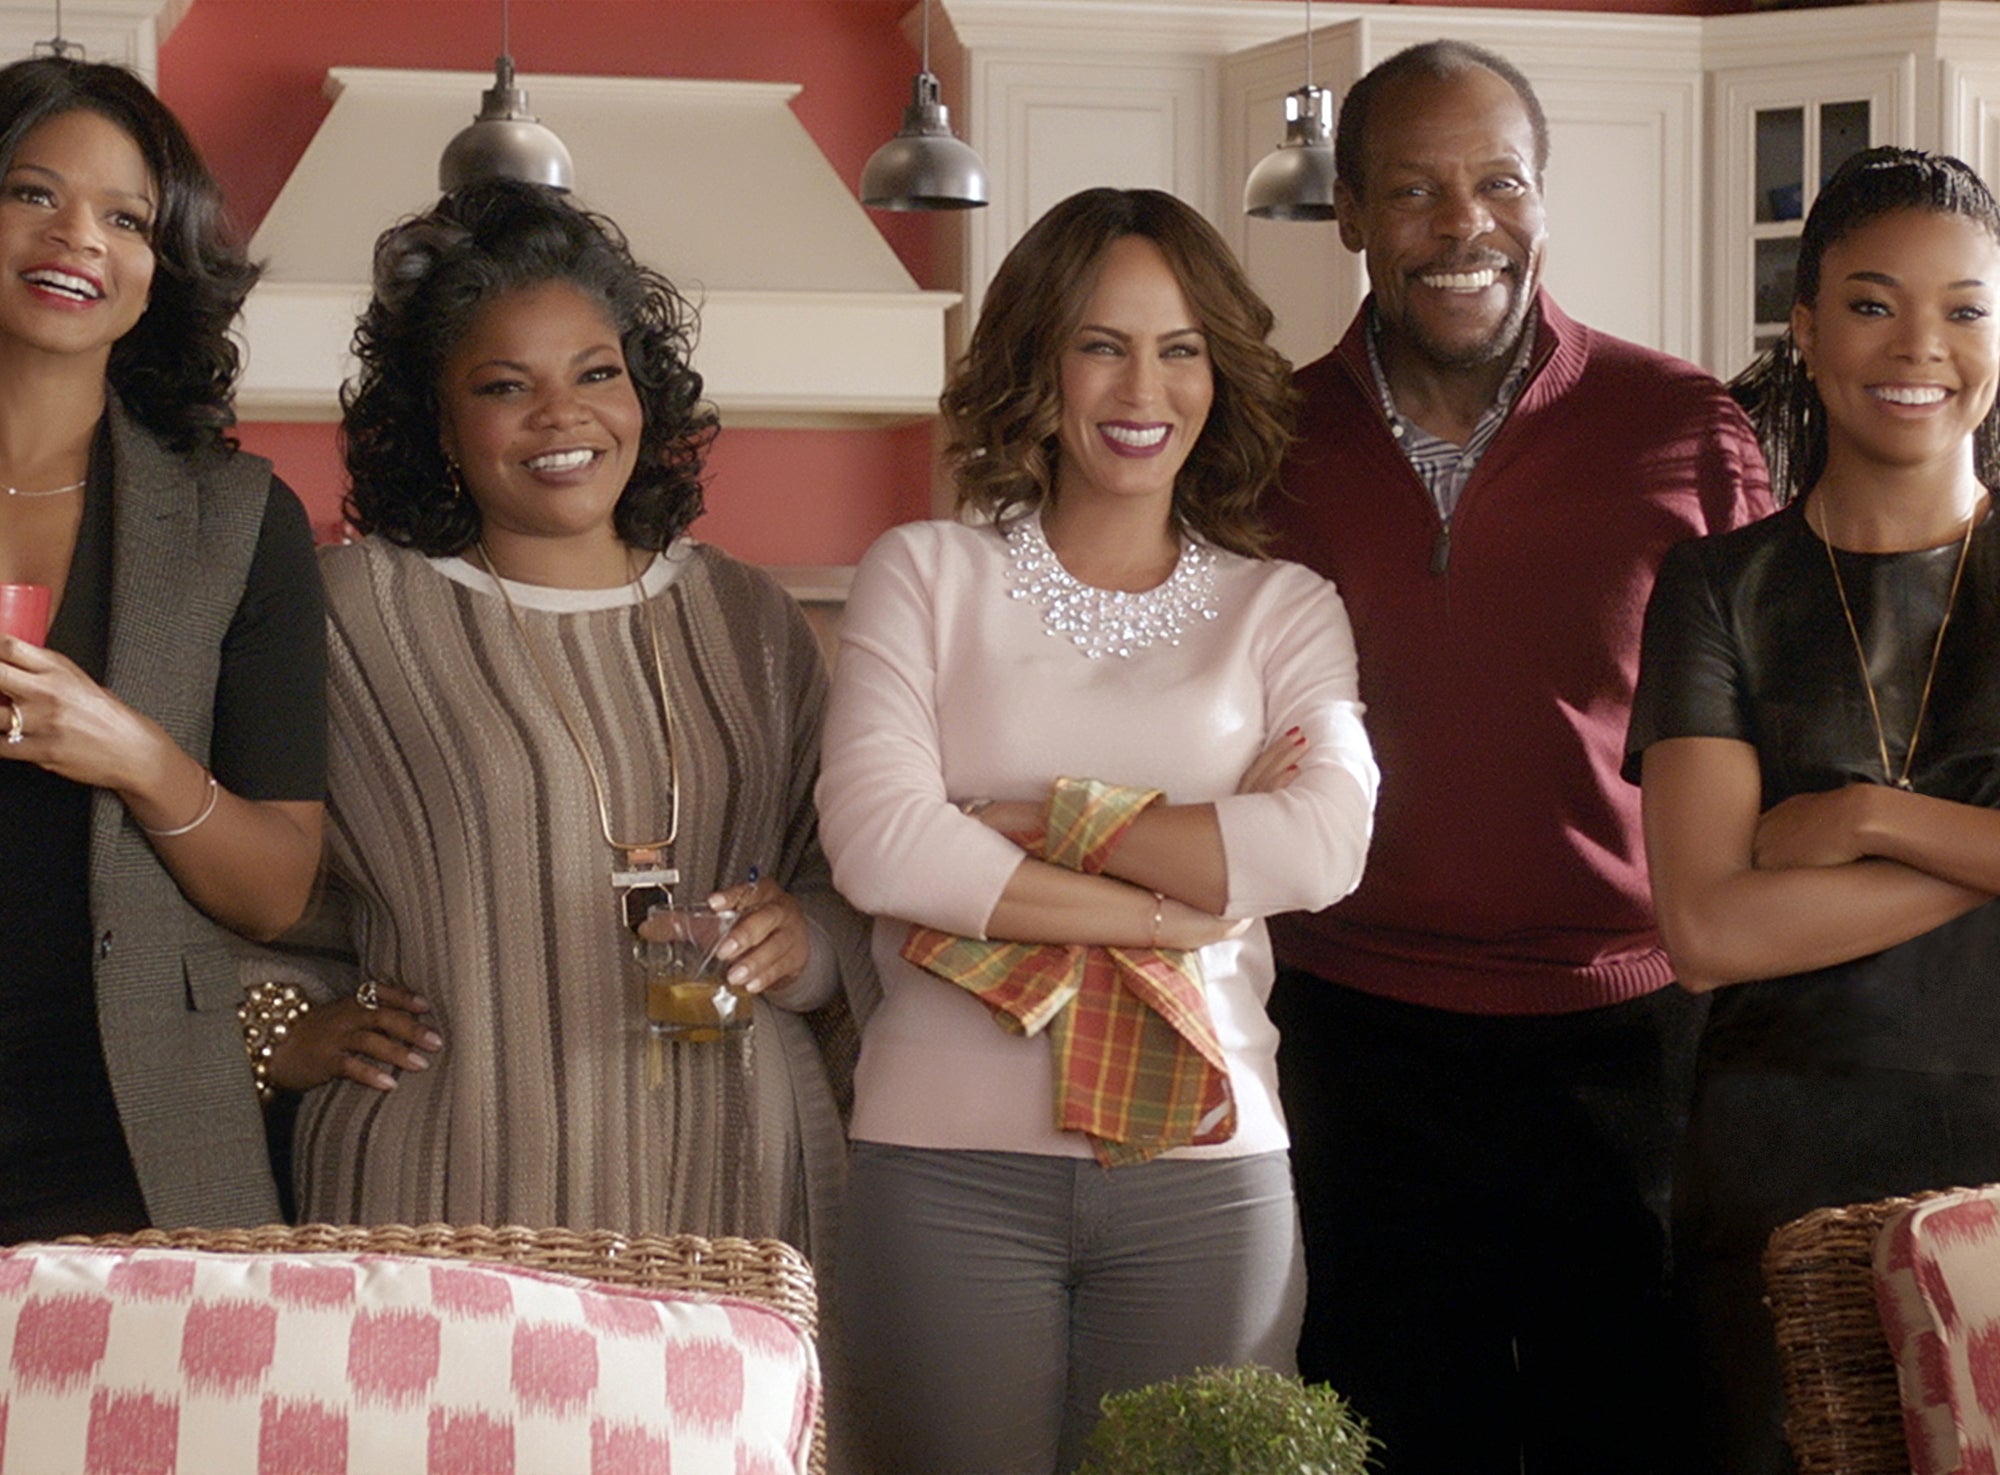 Watch The New Trailer For “Almost Christmas” Starring Gabrielle Union, Mo’Nique & More